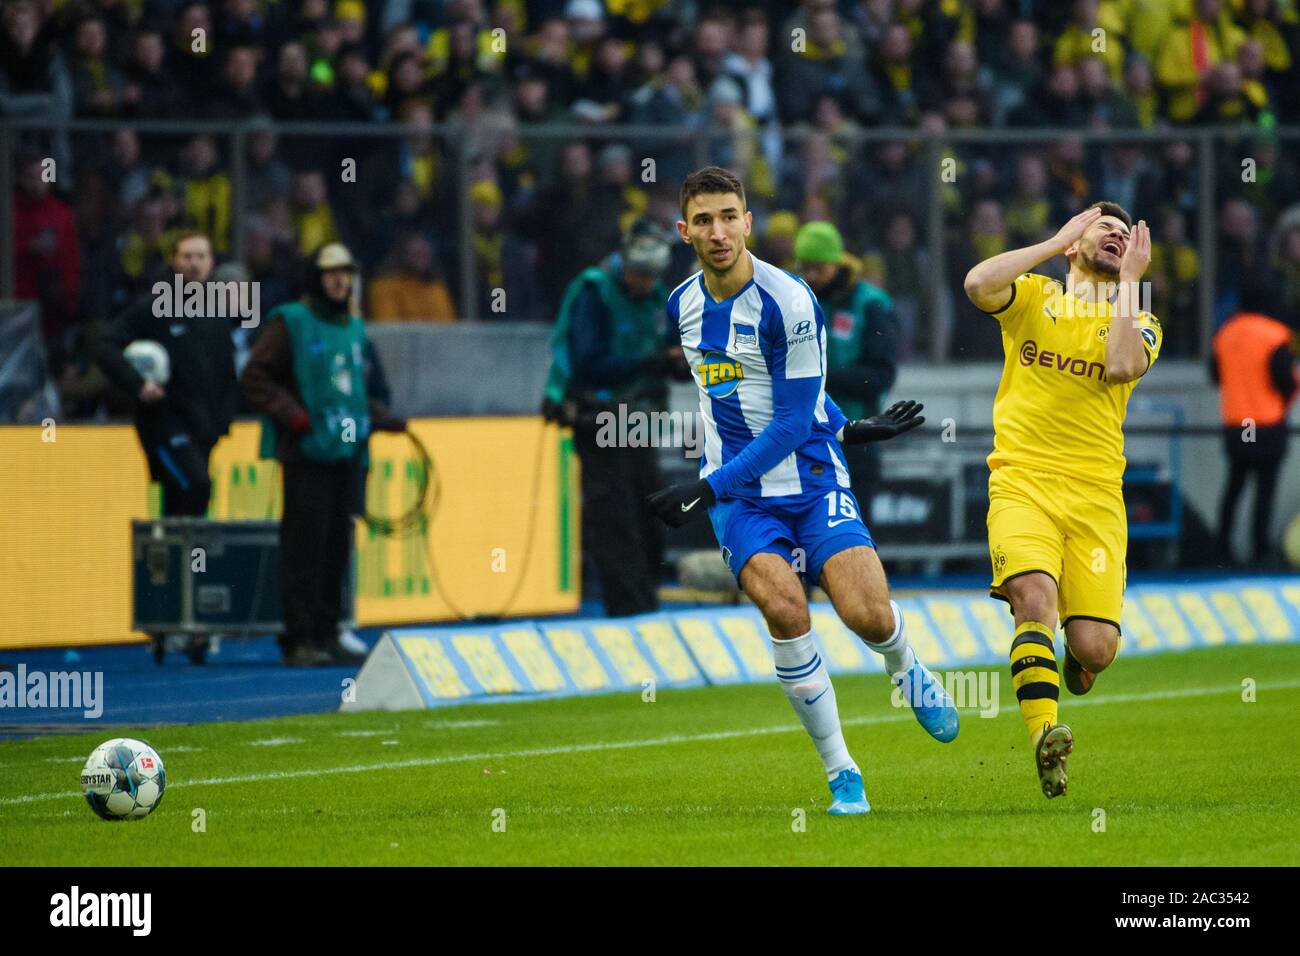 Berlin, Germany. 30th Nov, 2019. Soccer: Bundesliga, Hertha BSC - Borussia Dortmund, 13th matchday, Olympiastadion Berlin. Berlin's Lukas Klünter (l) and Dortmund's Raphael Guerreiro in a duel. Credit: Gregor Fischer/dpa - IMPORTANT NOTE: In accordance with the requirements of the DFL Deutsche Fußball Liga or the DFB Deutscher Fußball-Bund, it is prohibited to use or have used photographs taken in the stadium and/or the match in the form of sequence images and/or video-like photo sequences./dpa/Alamy Live News Stock Photo